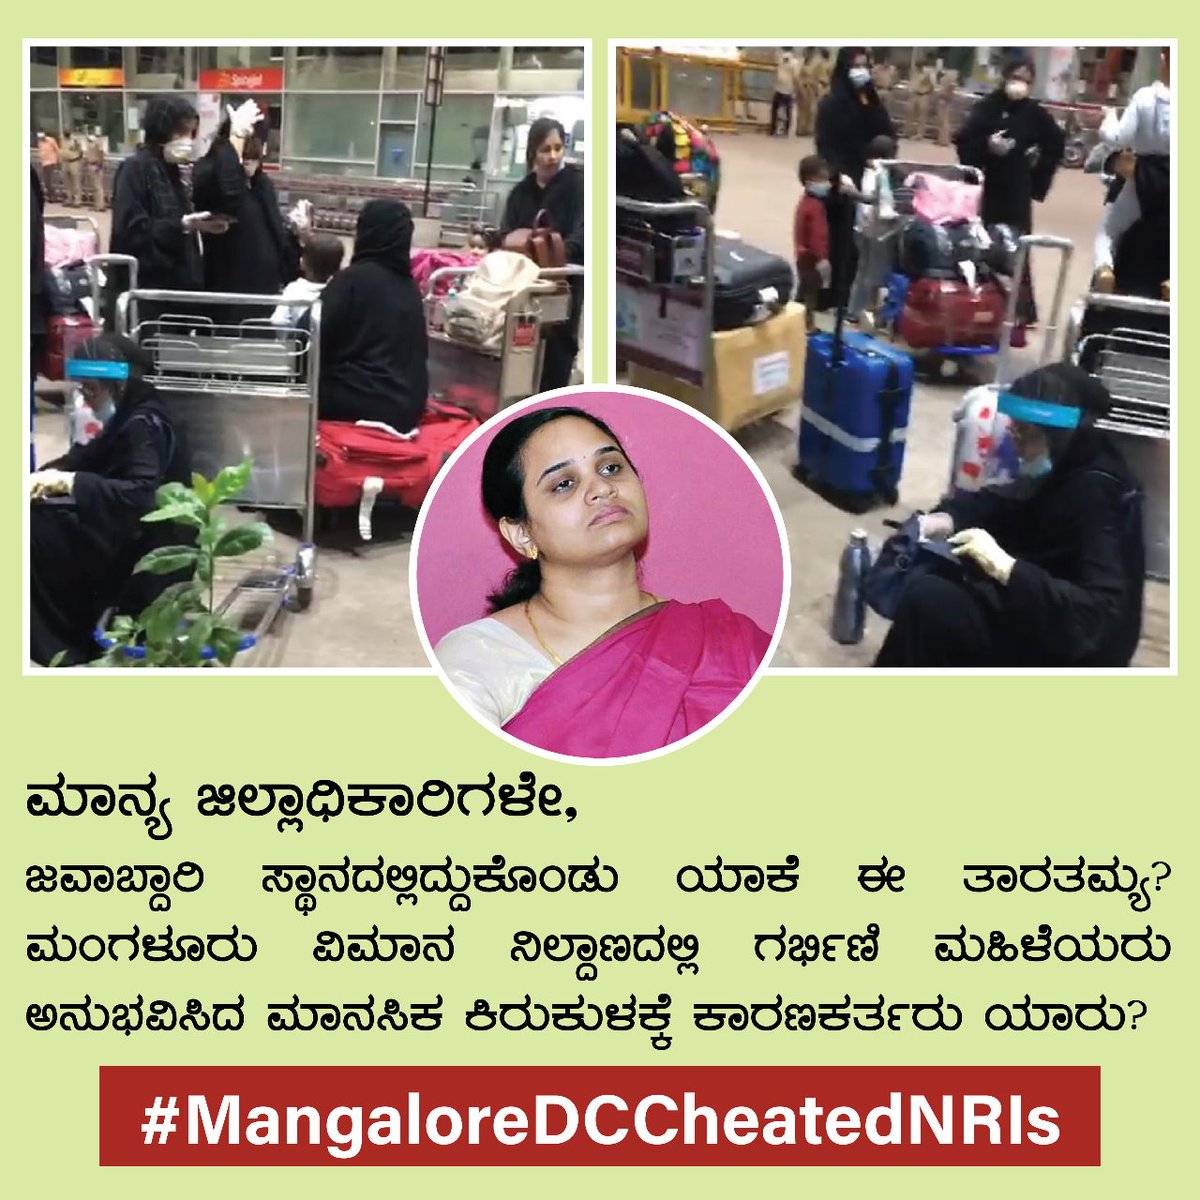 A pregnant Lady with tears shares audio of her experience with her family in WhatsApp which translates "If there is any life left, never step into Mangalore Airport. They didn't even look at the aspect of pregnancy and tortured and harassed." #MangaloreDCcheatedNRIs11/n